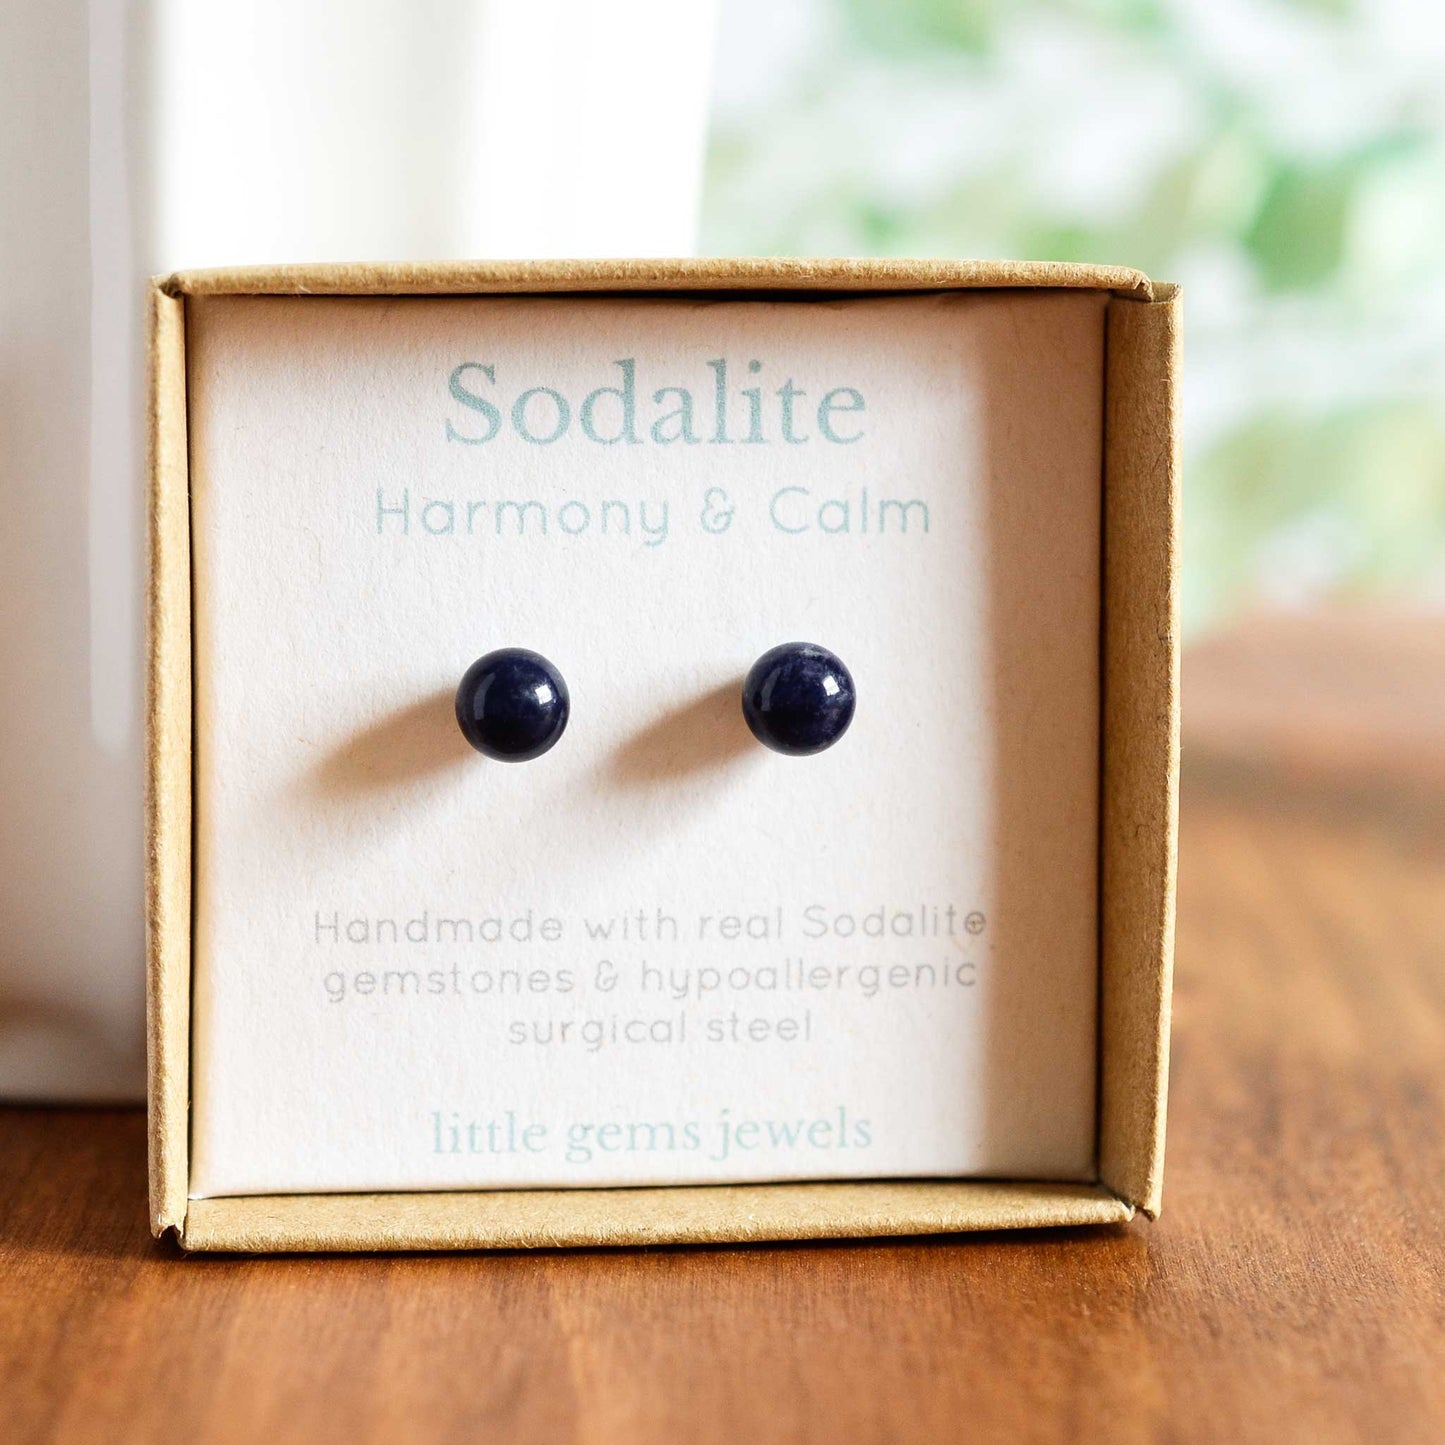 Sodalite for harmony and calm gemstone earrings in an eco friendly gift box